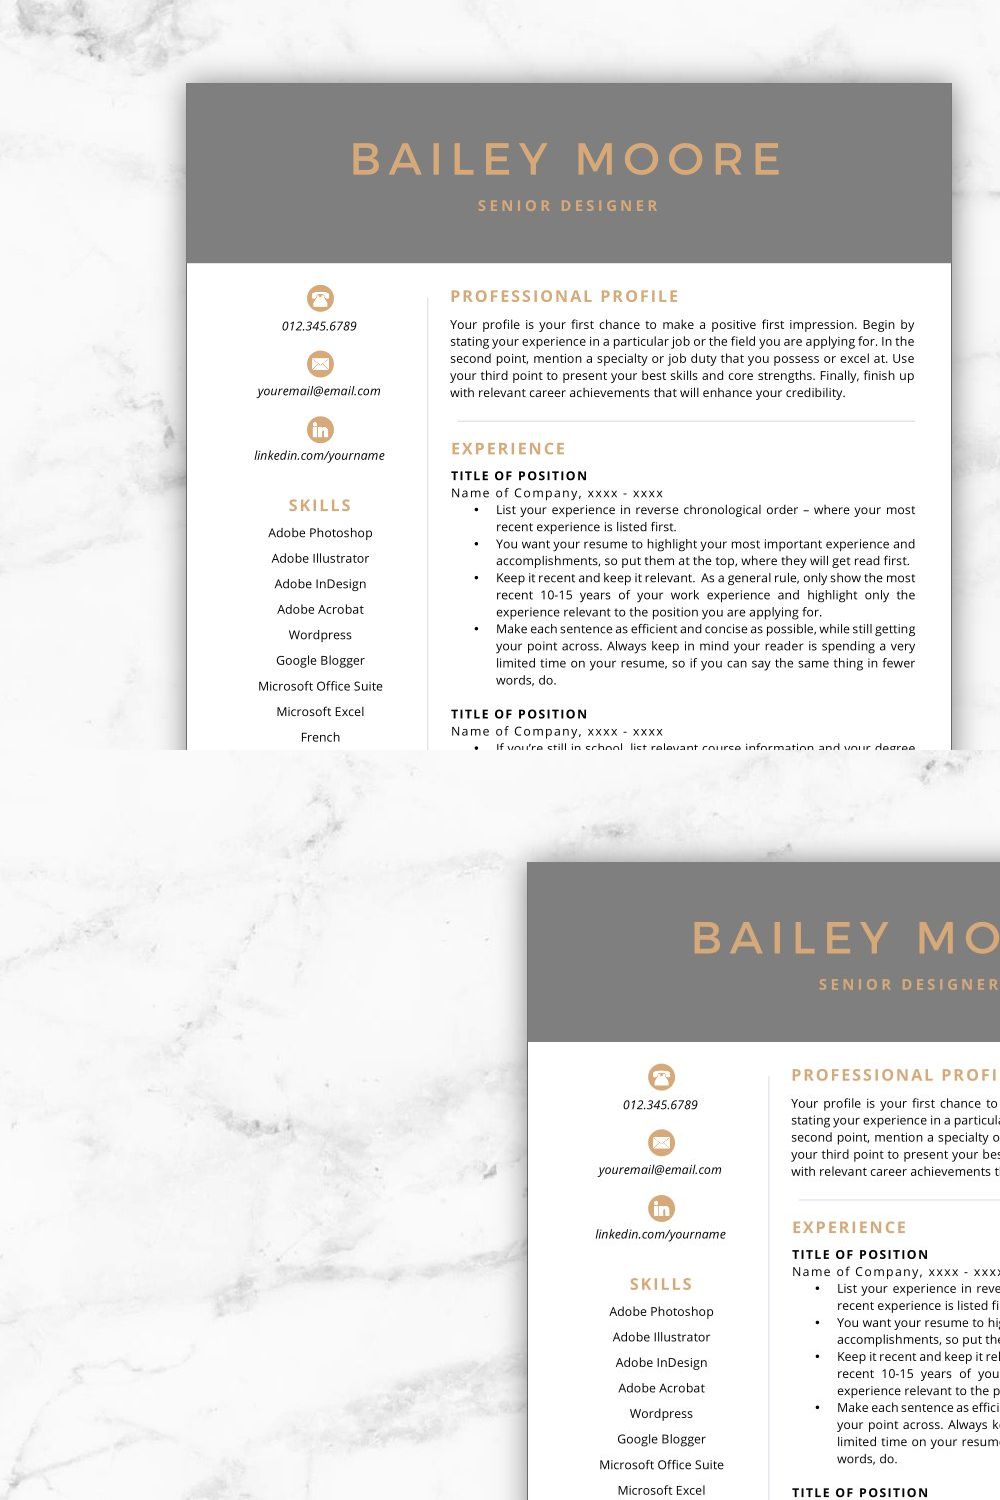 CV Template/Resume - Bailey pinterest preview image.